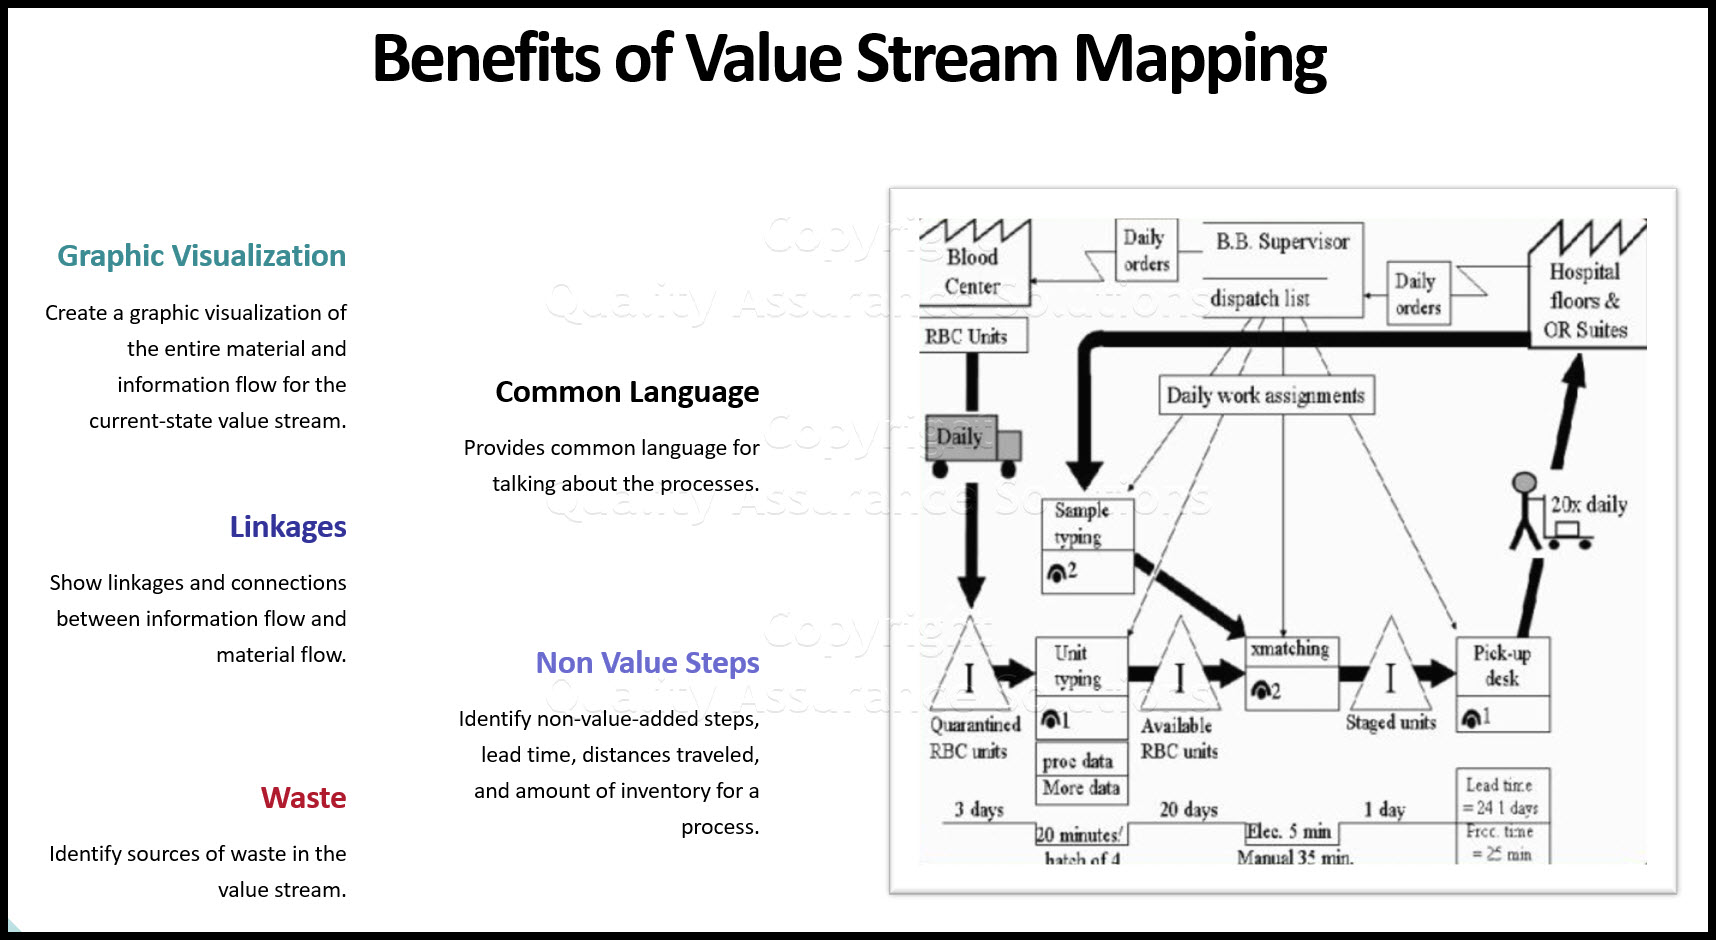 a value stream mapping is the first step required in any lean improvement initiative